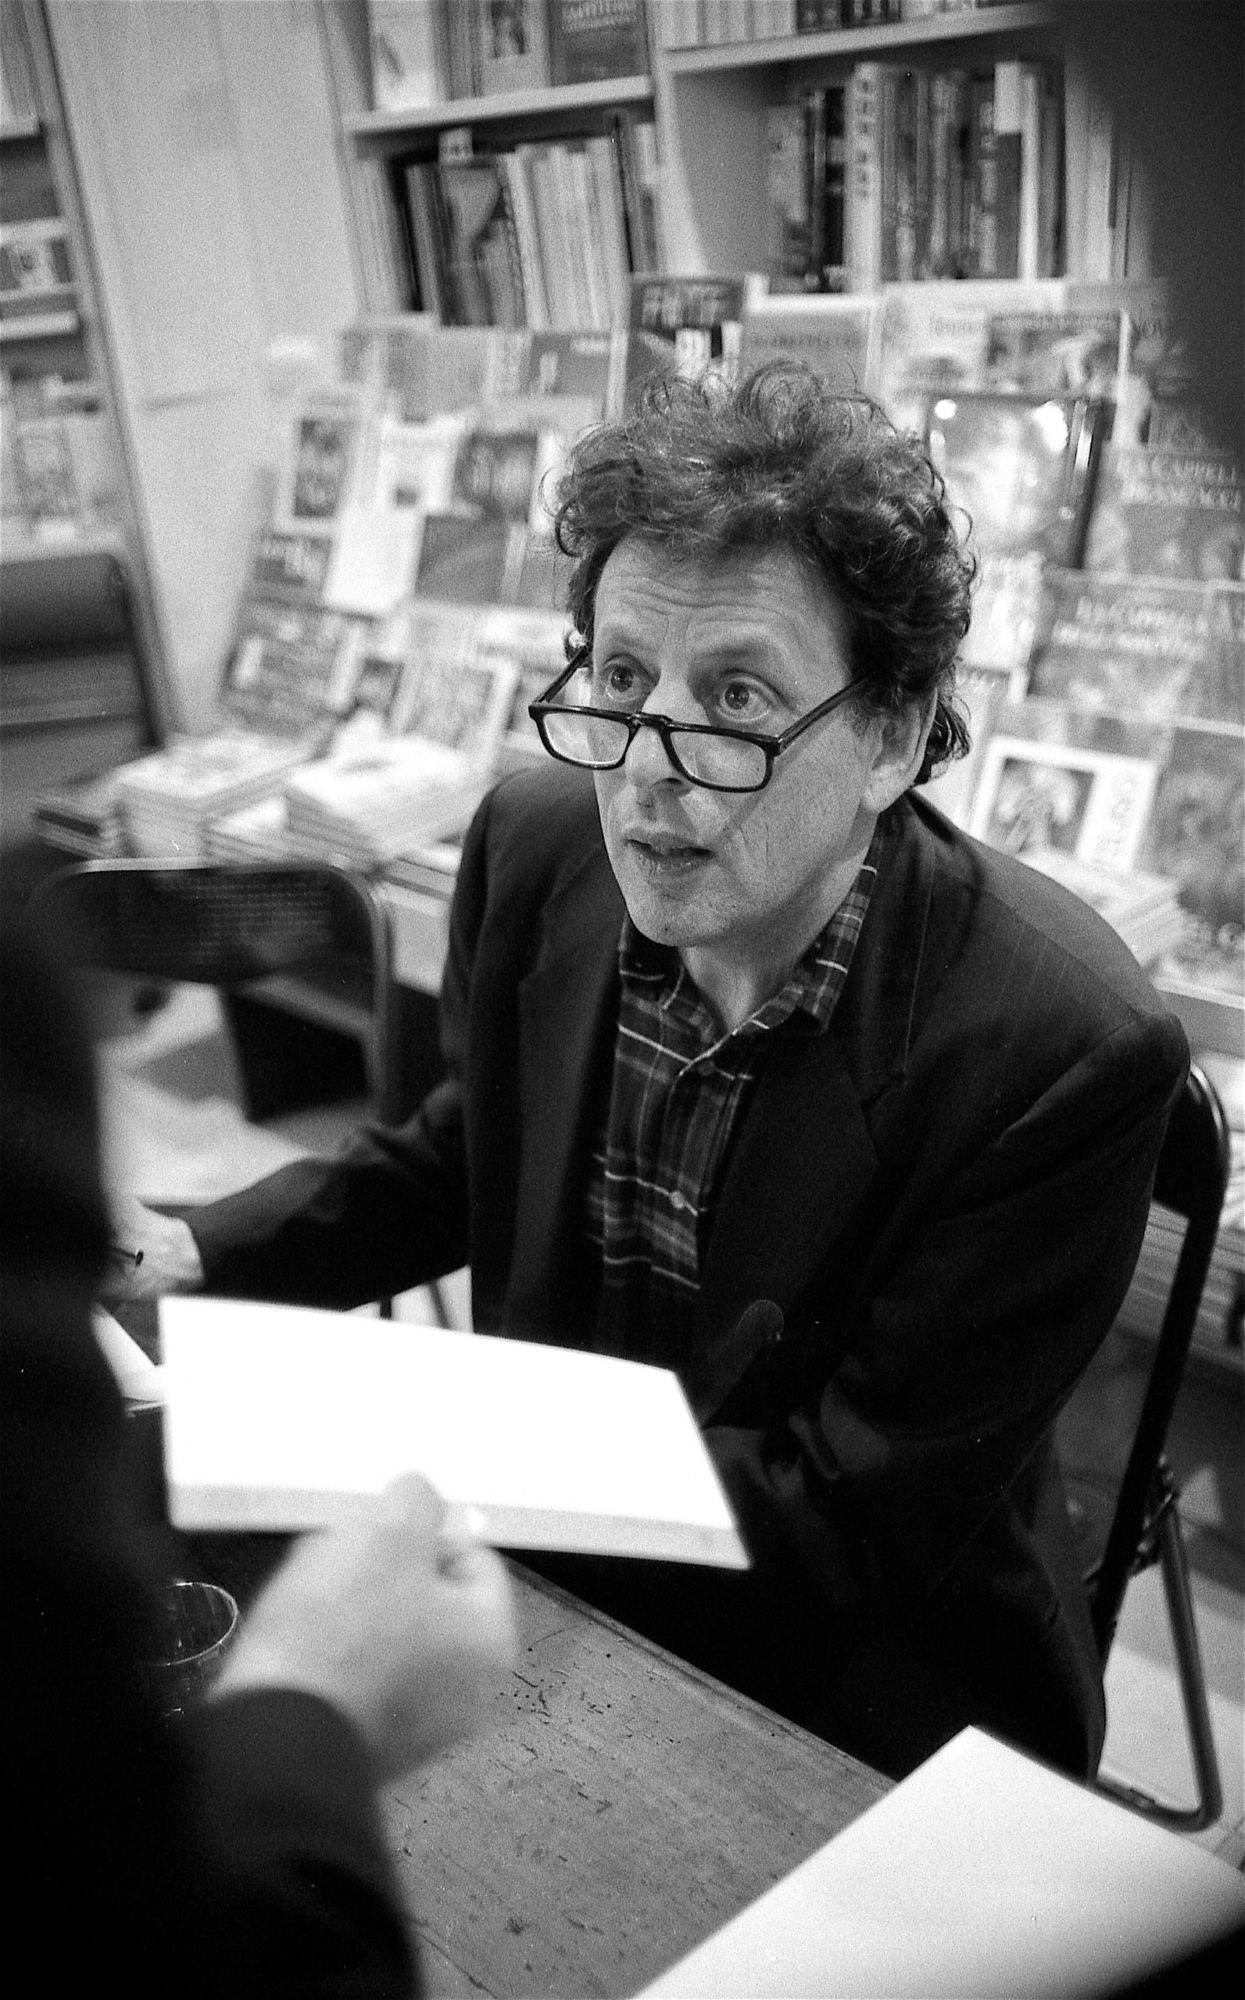 Black and white photograph of Philip Glass wearing glasses and sitting at desk in front of bookshelf, a hand with sheet of paper reaches into frame